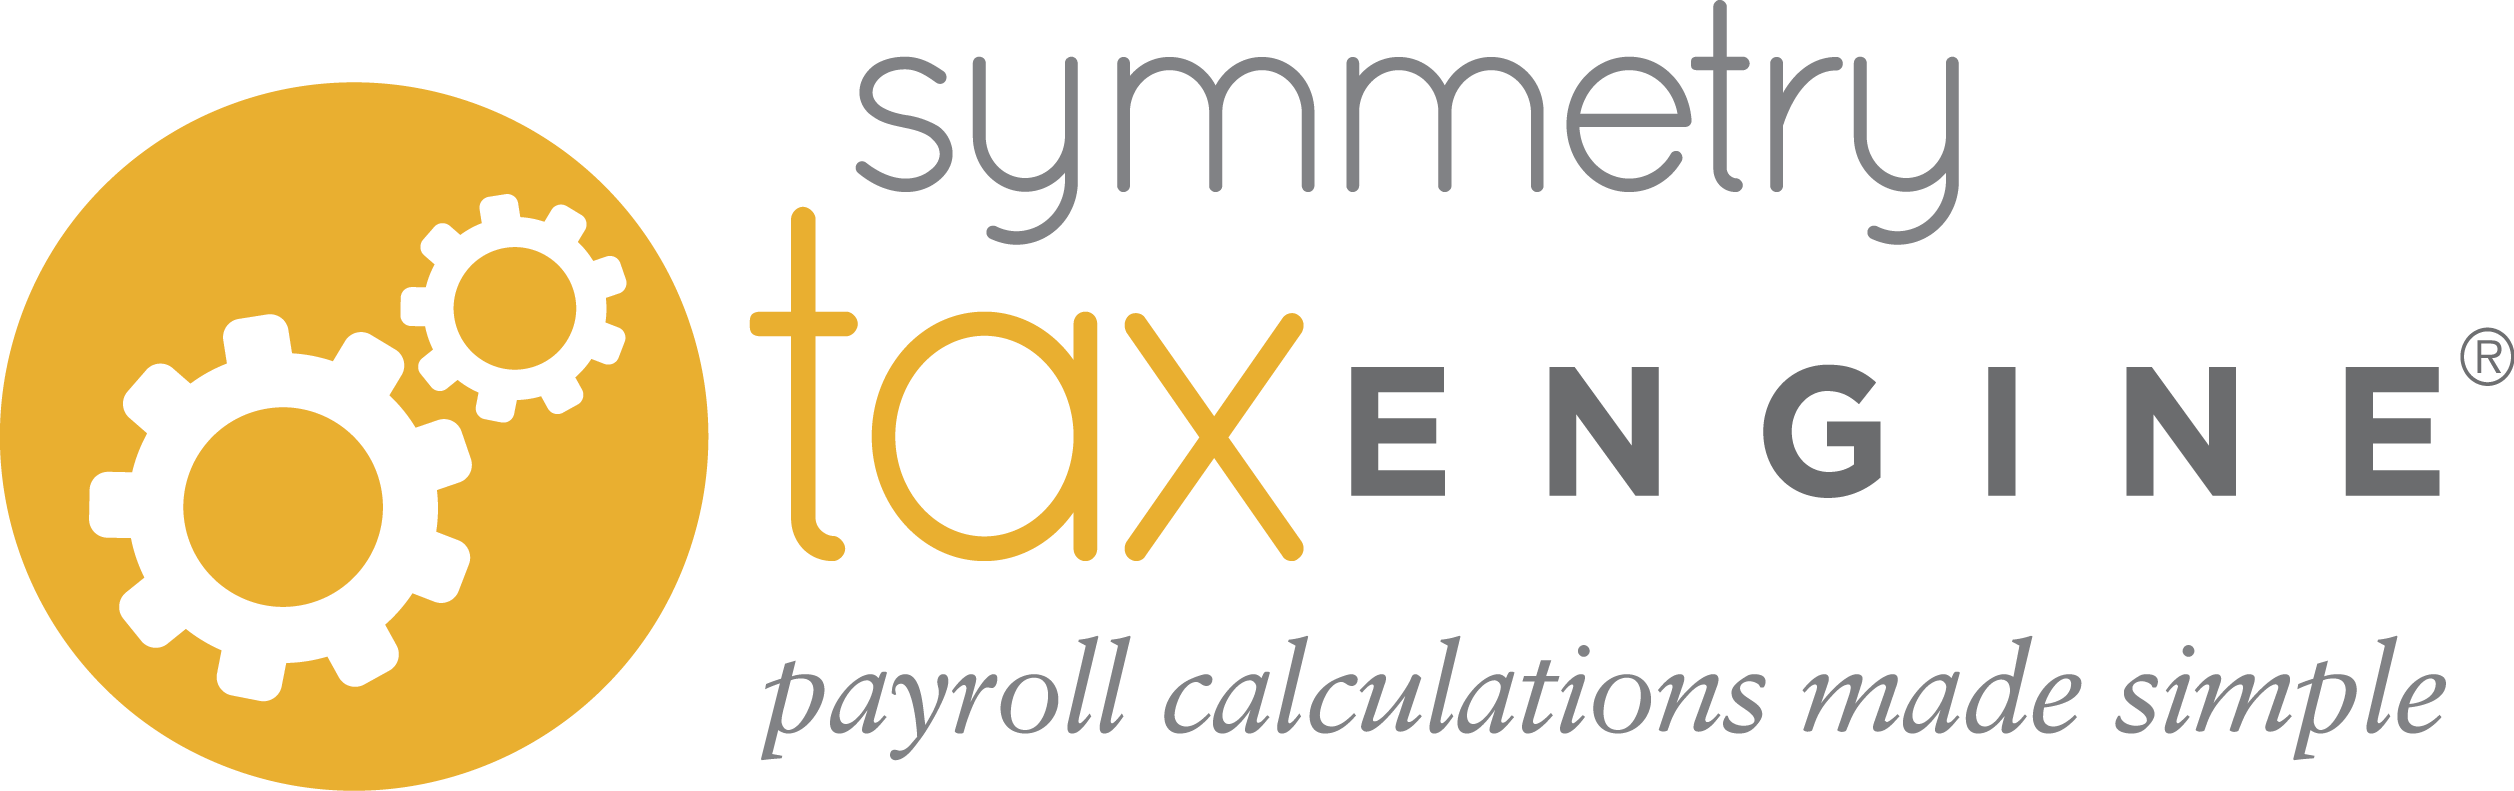 Symmetry Tax Engine, calculates payroll withholding and employer taxes for Federal, State, Puerto Rico, and US Territories.